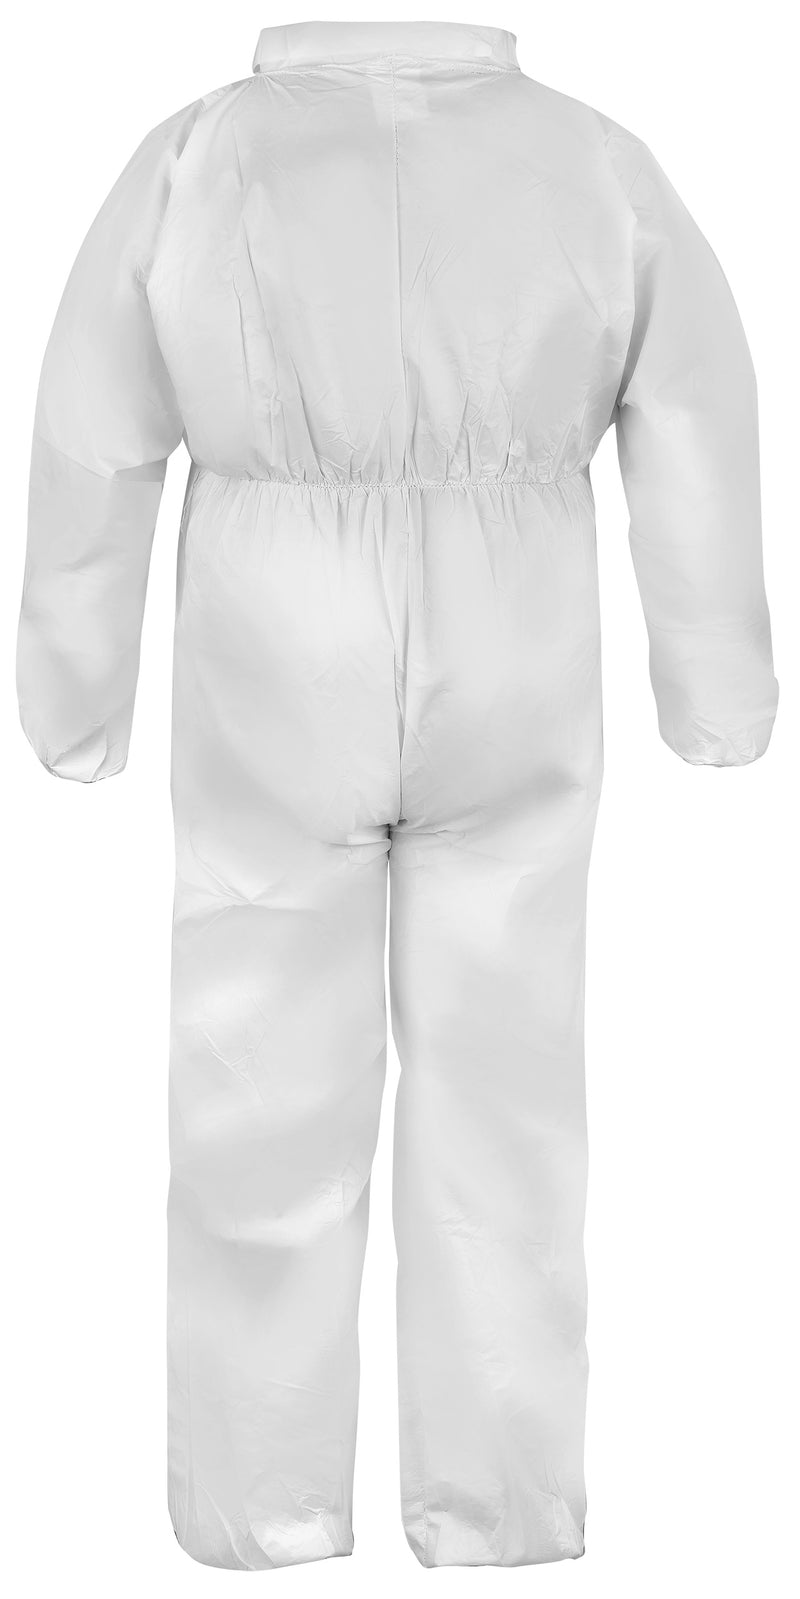 ProSafe® 2 protective coverall - with collar